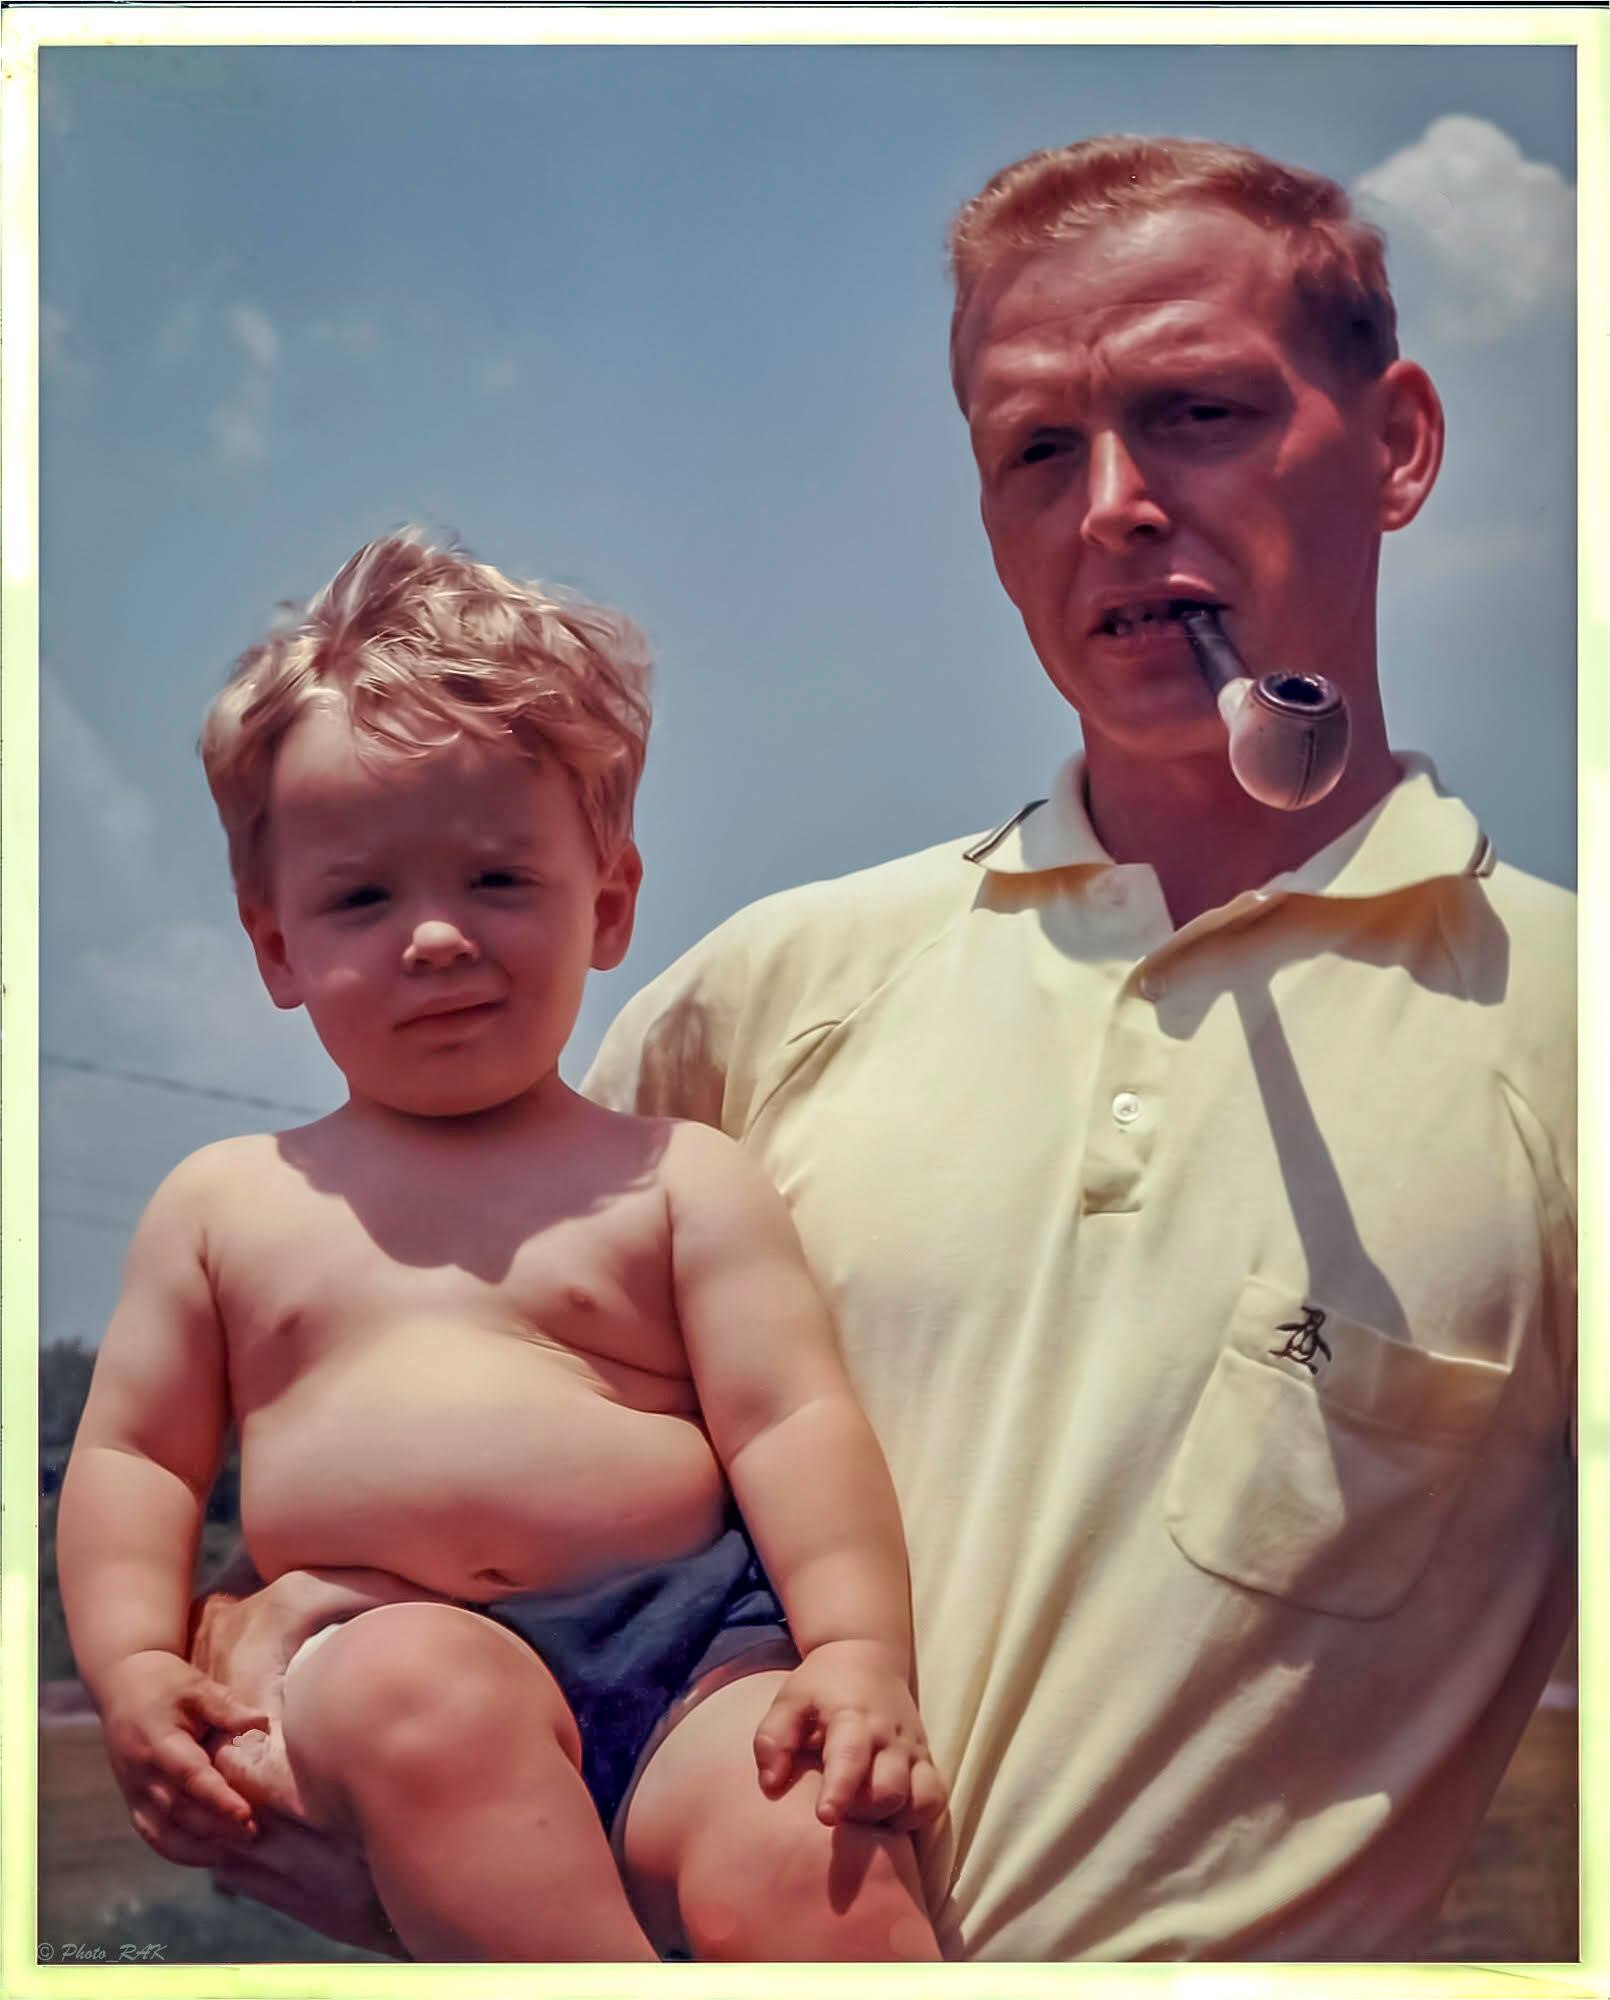 Col. Richard 'Dick' Kibbey and his son, John, pose for a photo circa 1963. Dick was a pilot in Vietnam when his helicopter was shot down and he was listed as missing in action for over 50 years before his remains were returned to the United States after being found by a local farmer. (Photo courtesy of Richard Kibbey)